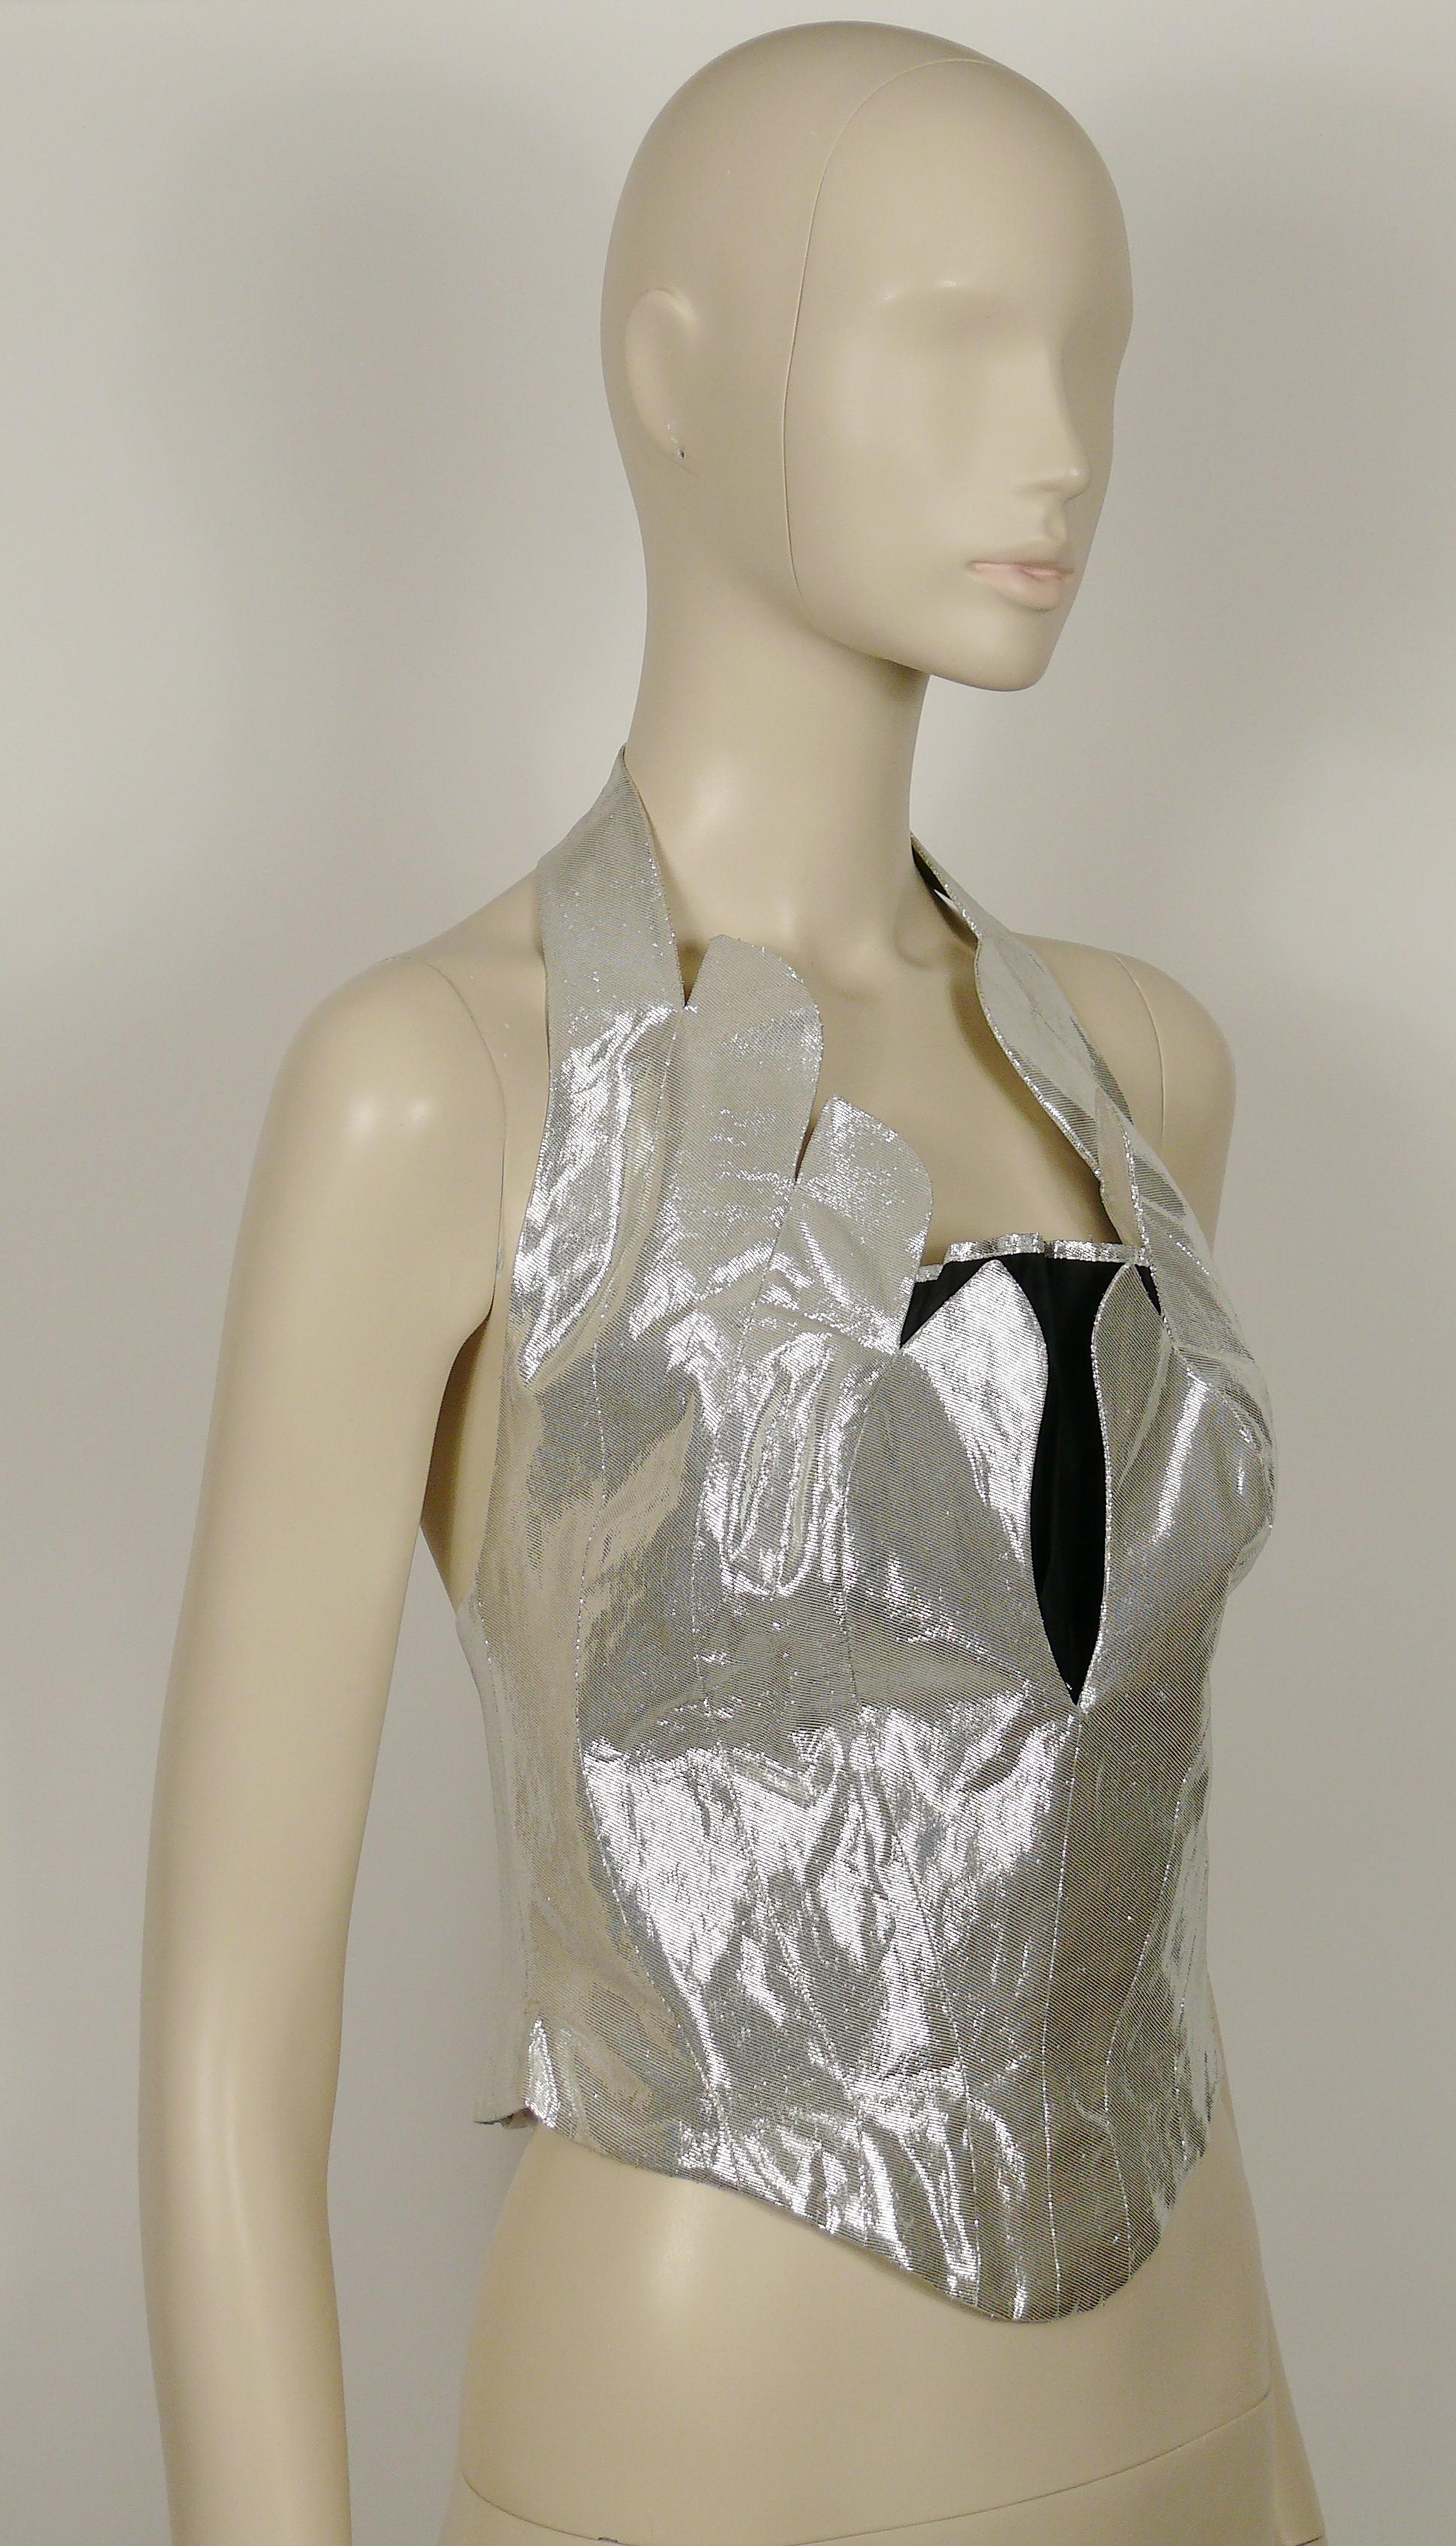 THIERRY MUGLER vintage iconic silver lame bustier corset with scalloped edges.

Snap button closure on the halter strap (2 extra buttons have been added / see the last photo).
Hook and eye loop closure at the back.

Label reads THIERRY MUGLER